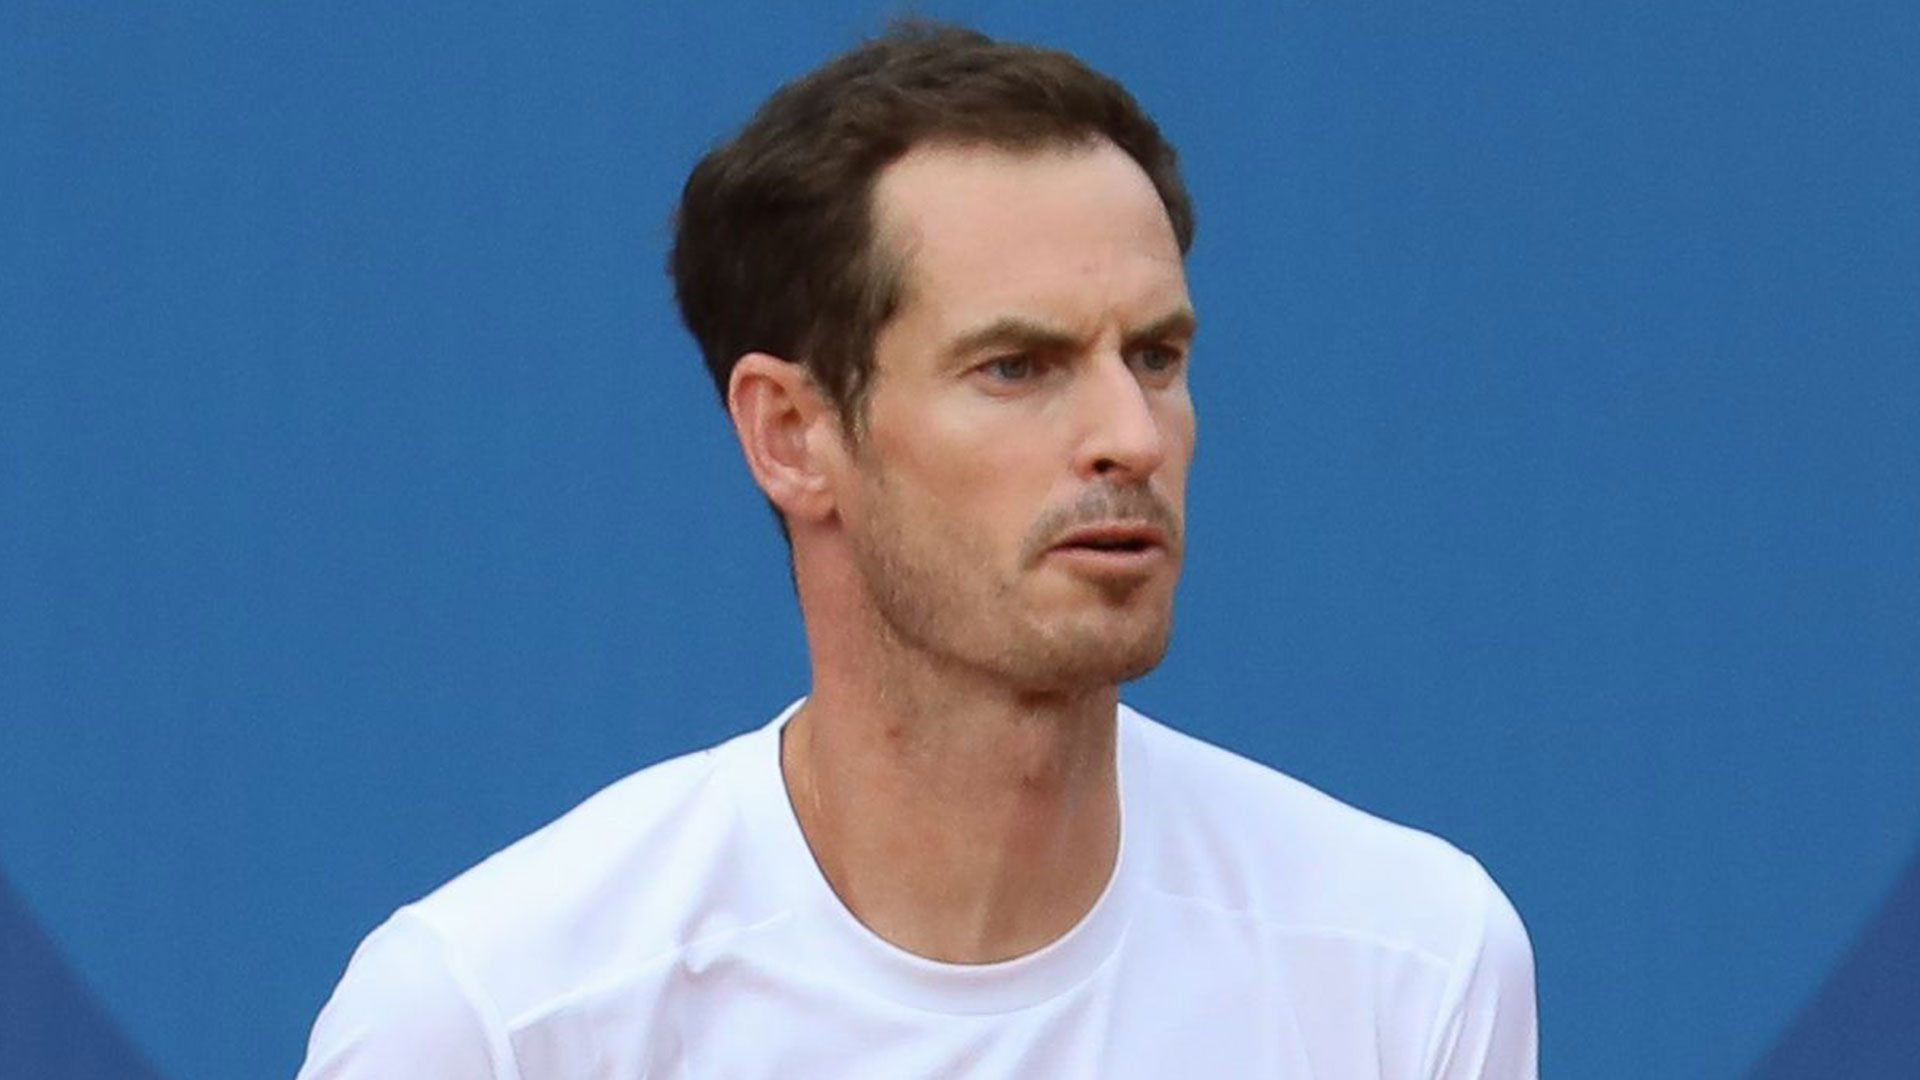 Andy Murray tipped for shock career change after British legend announces he will retire from tennis [Video]